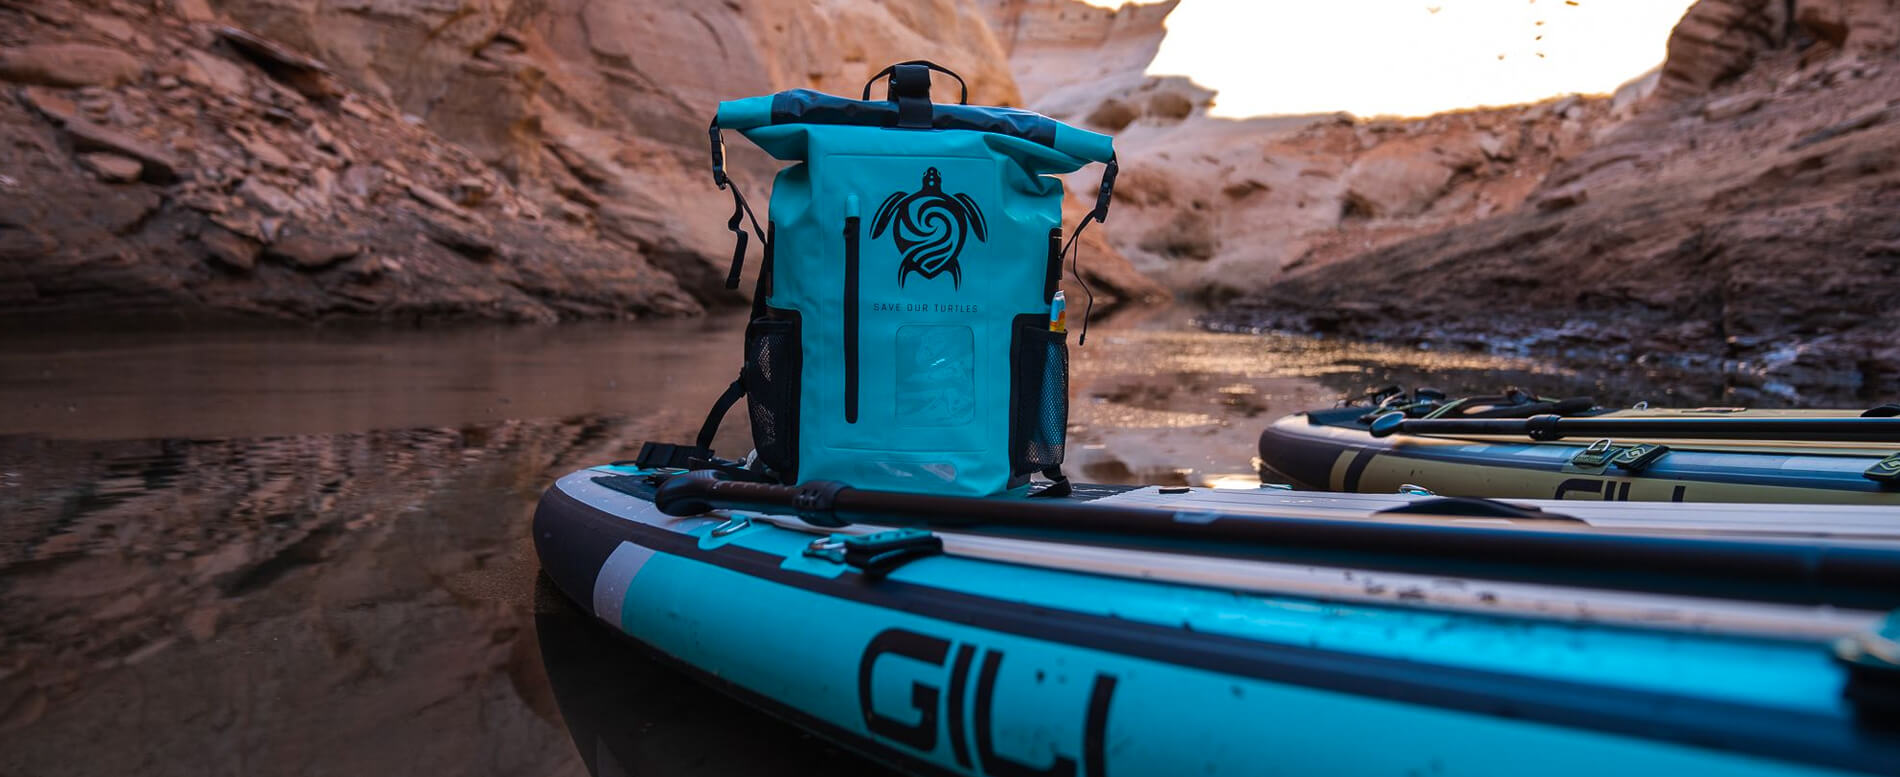 GILI waterproof backpack on deck of an inflatable paddle board